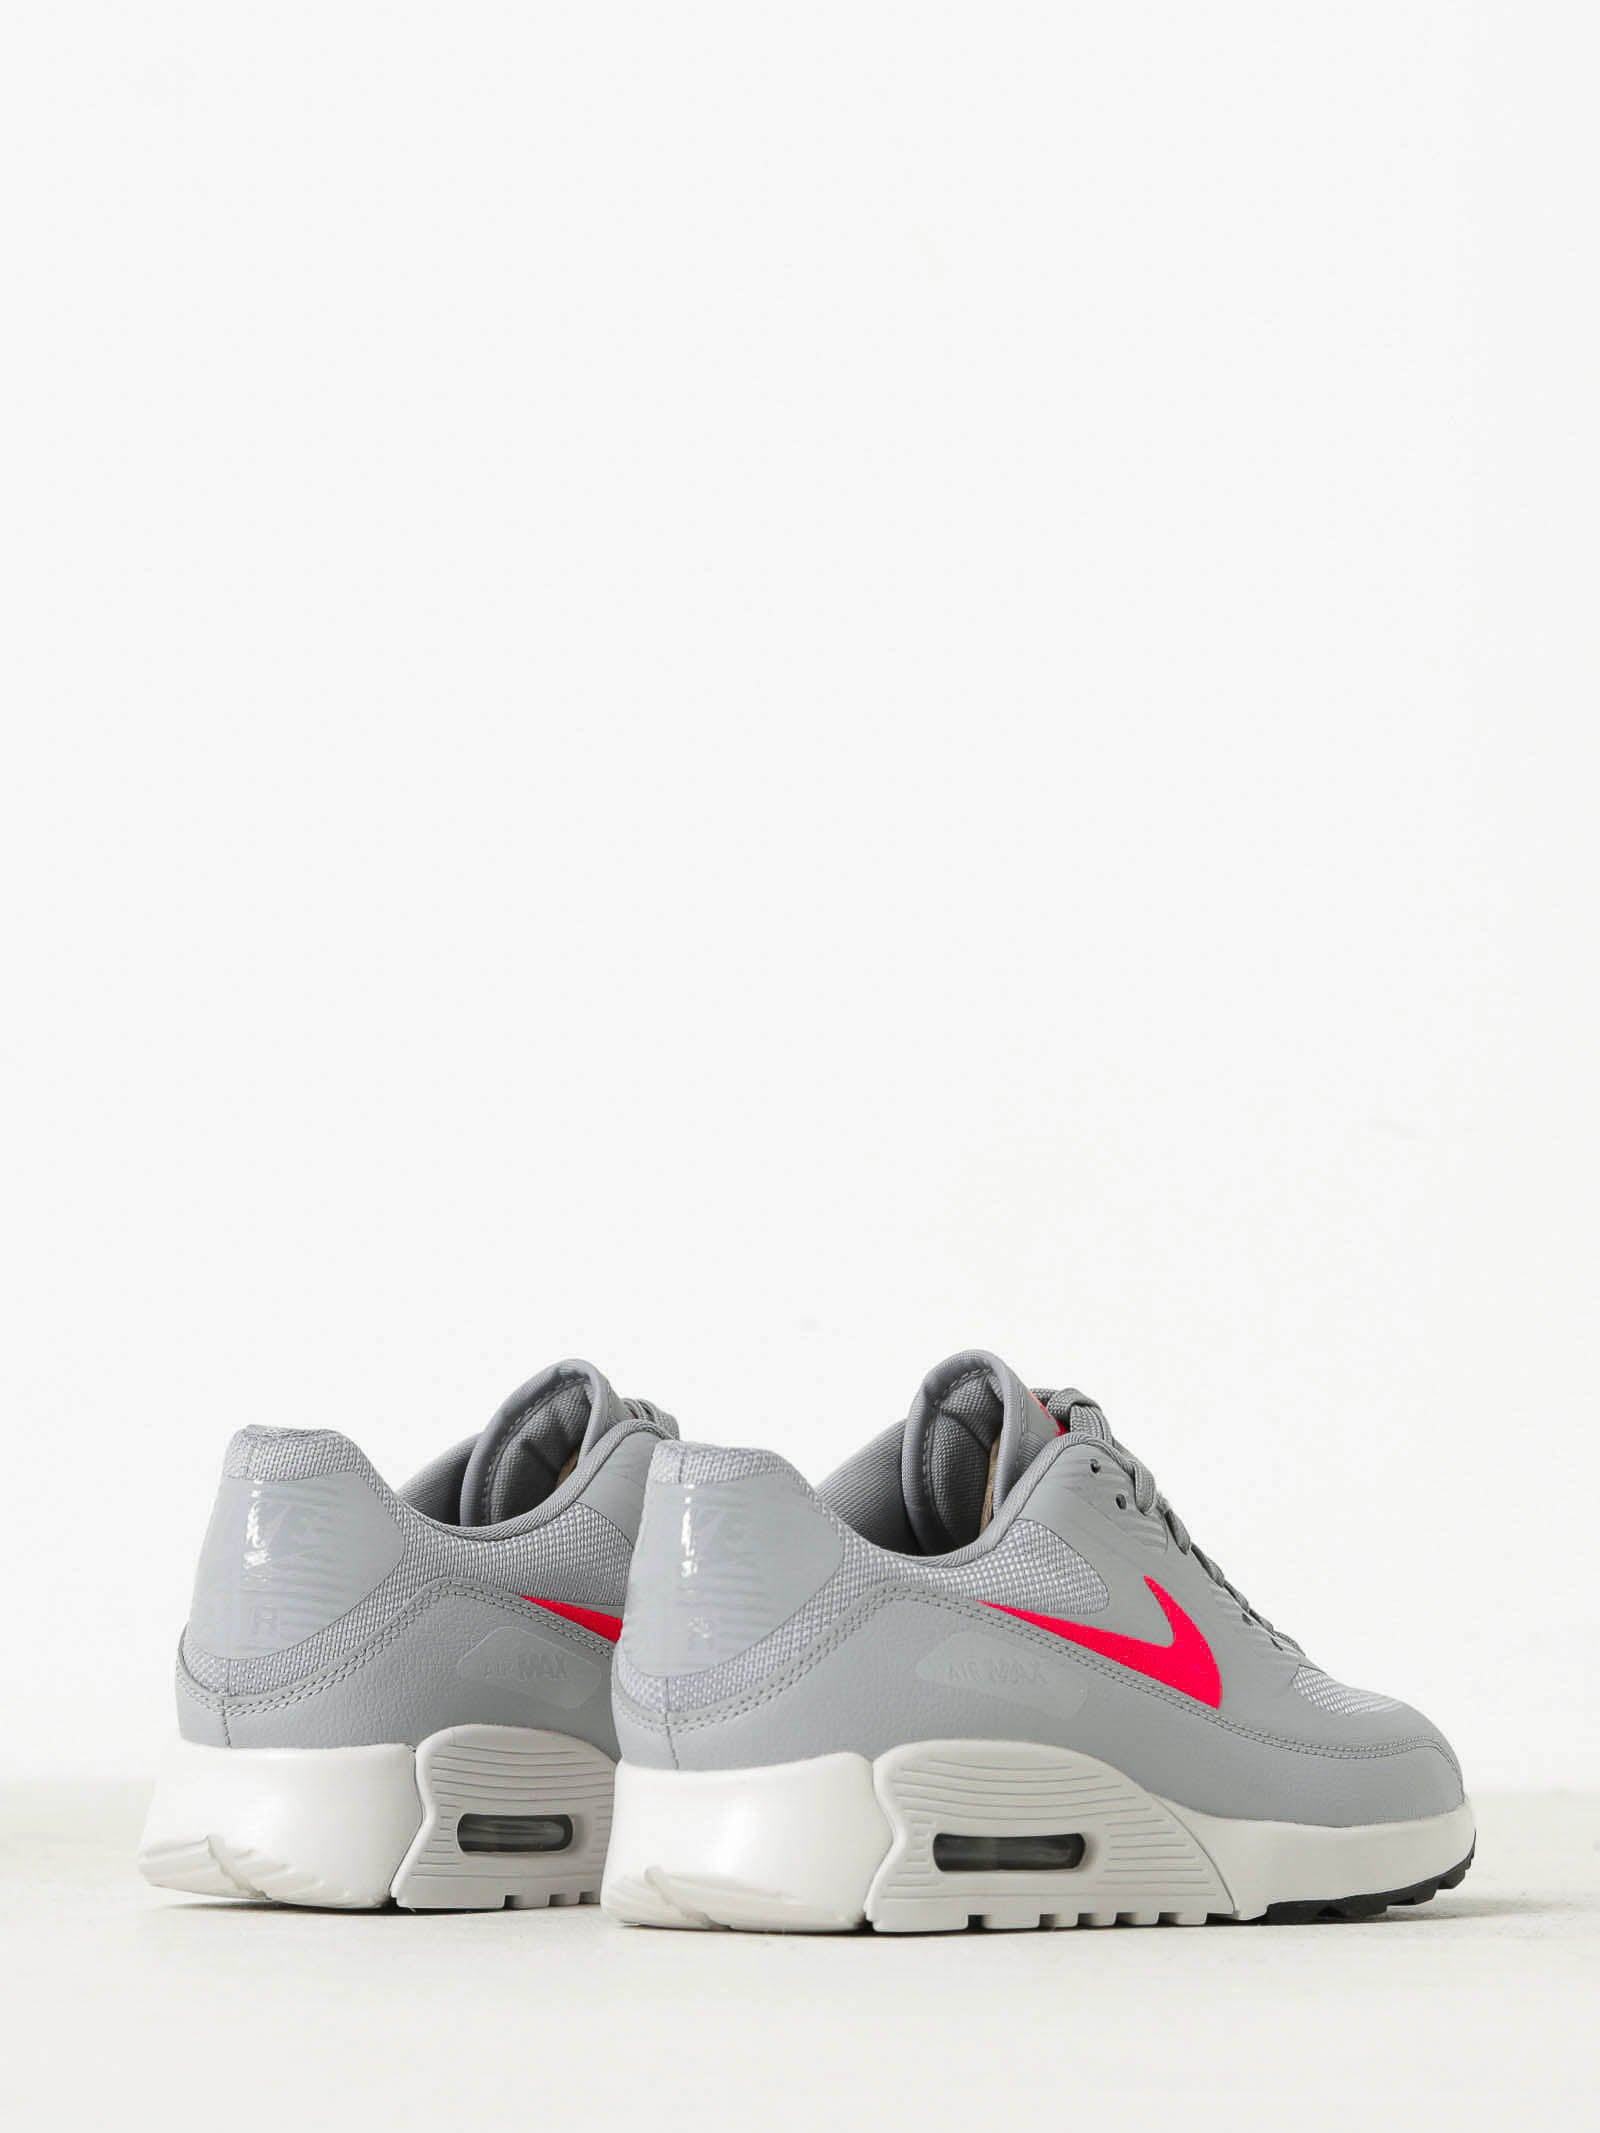 Womens Air Max 90 Ultra 2.0 Sneakers in Grey & Bright Pink